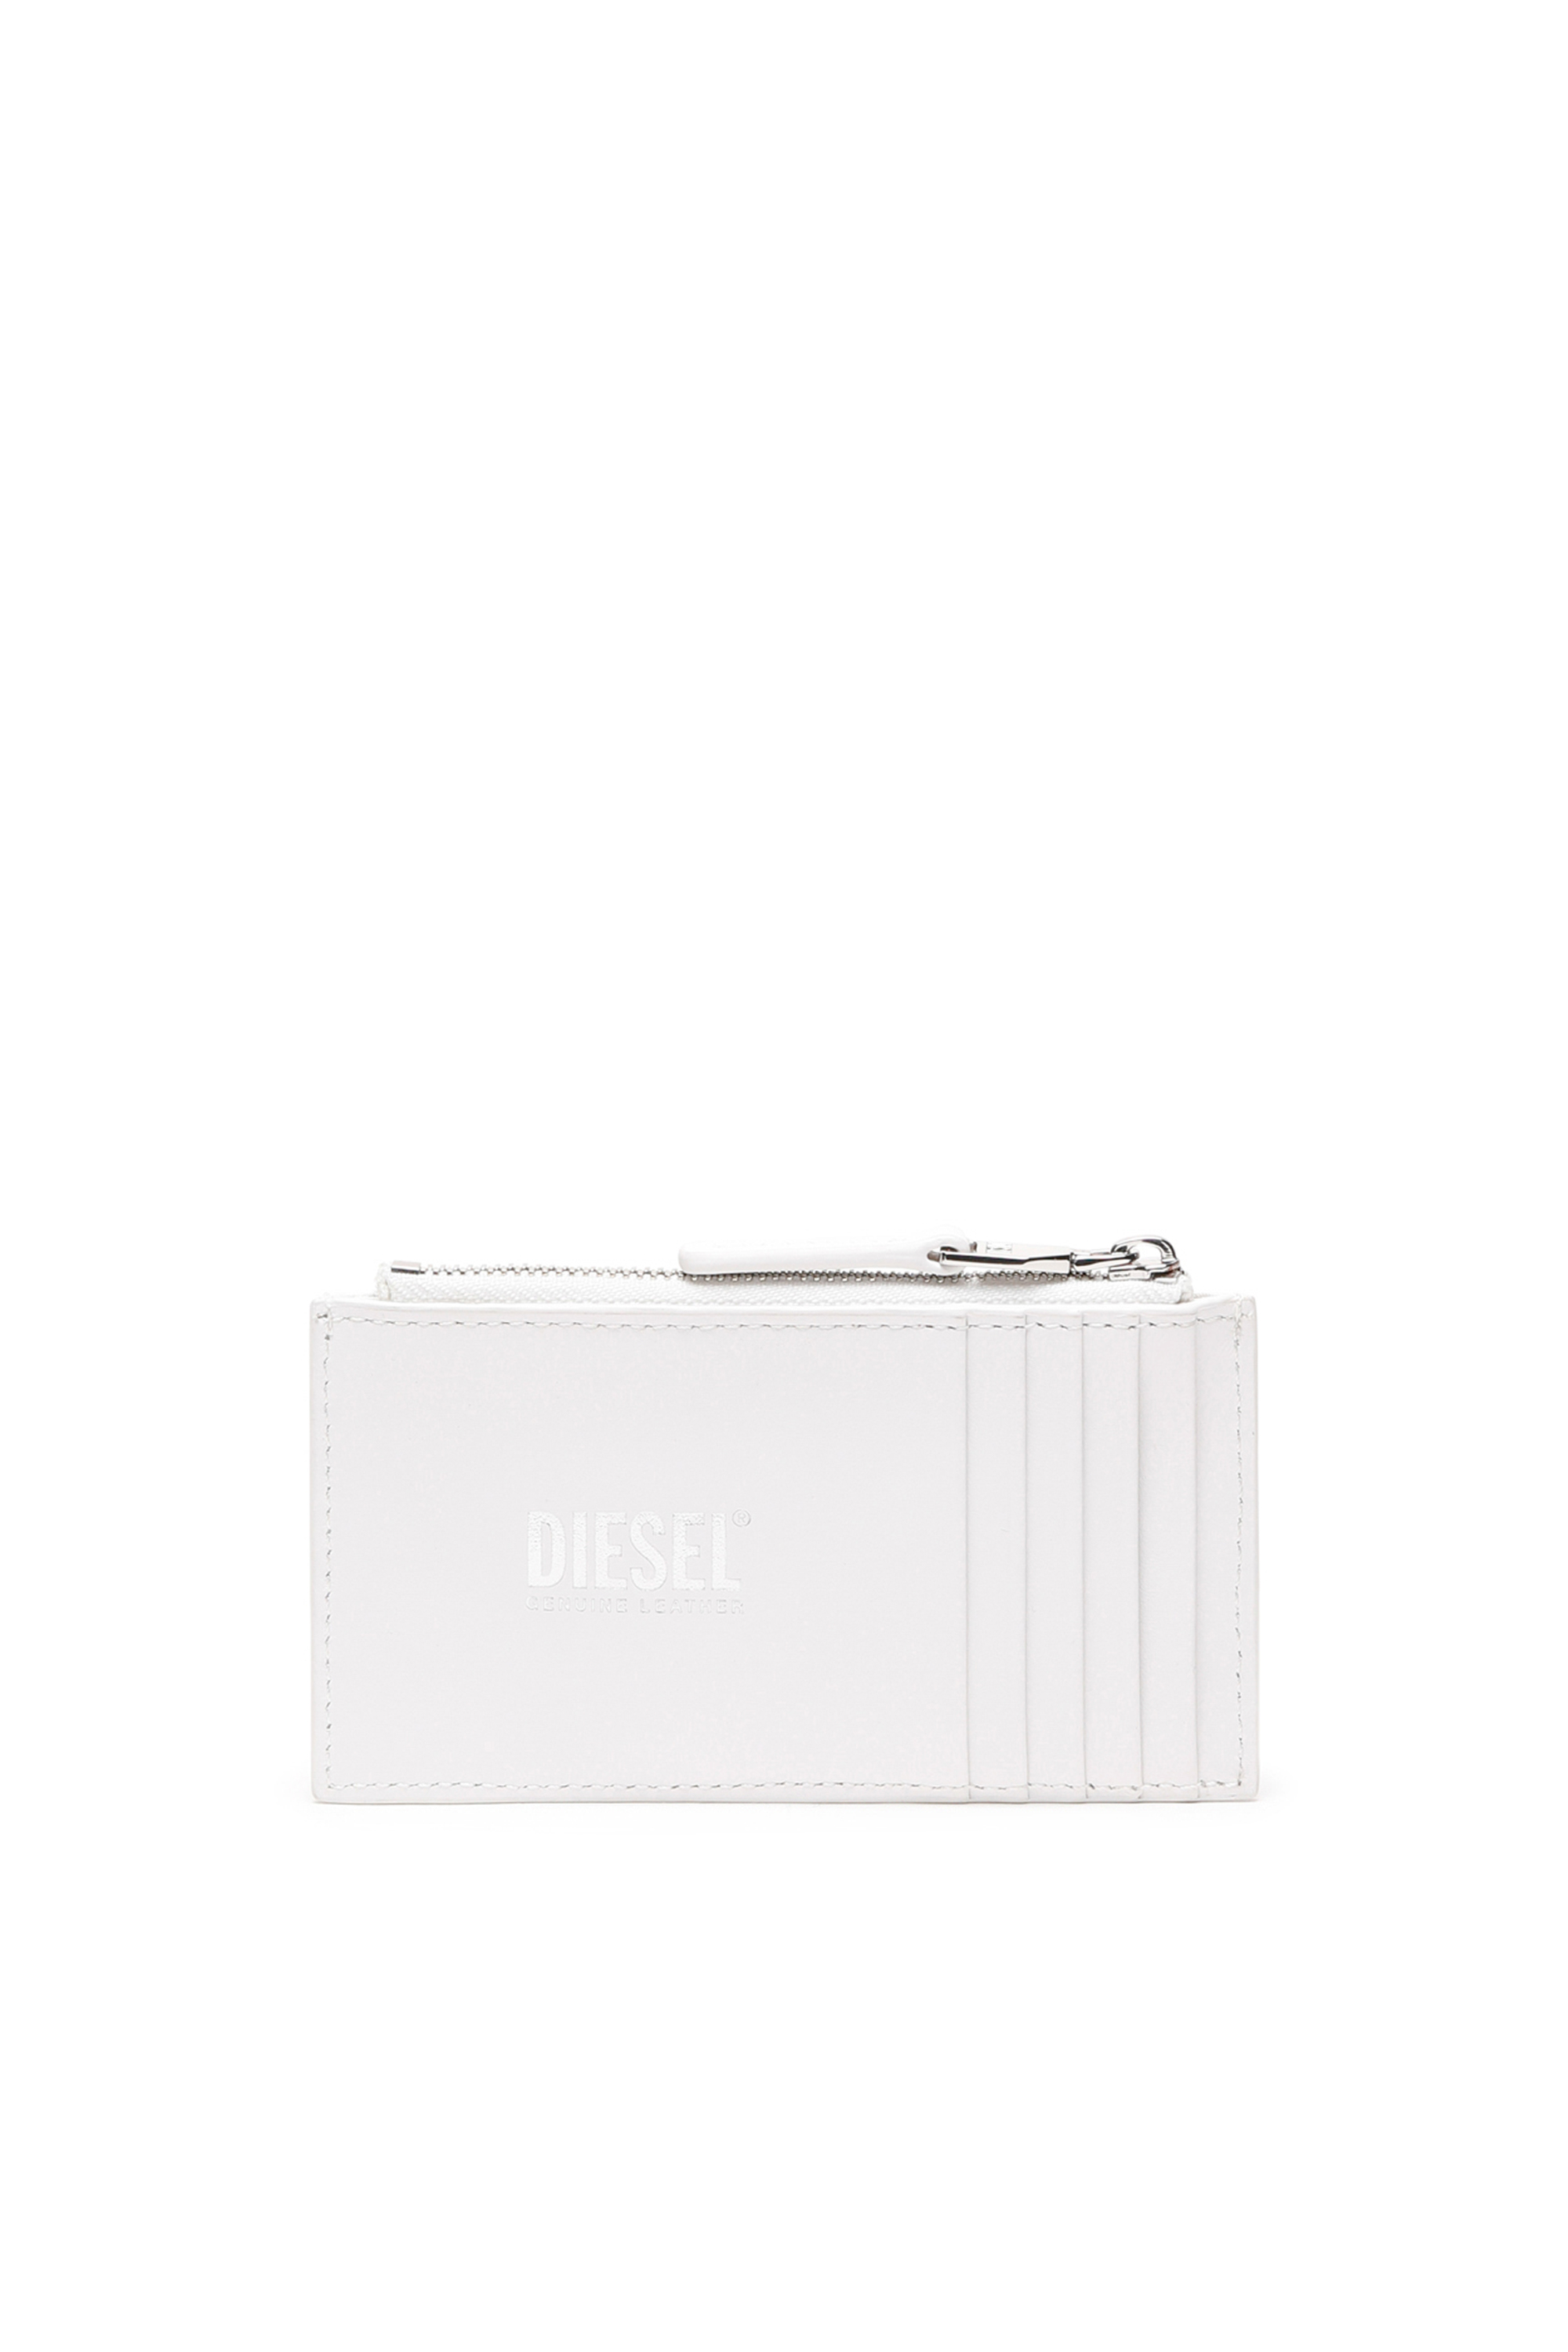 Diesel - PAOULINA, White - Image 2